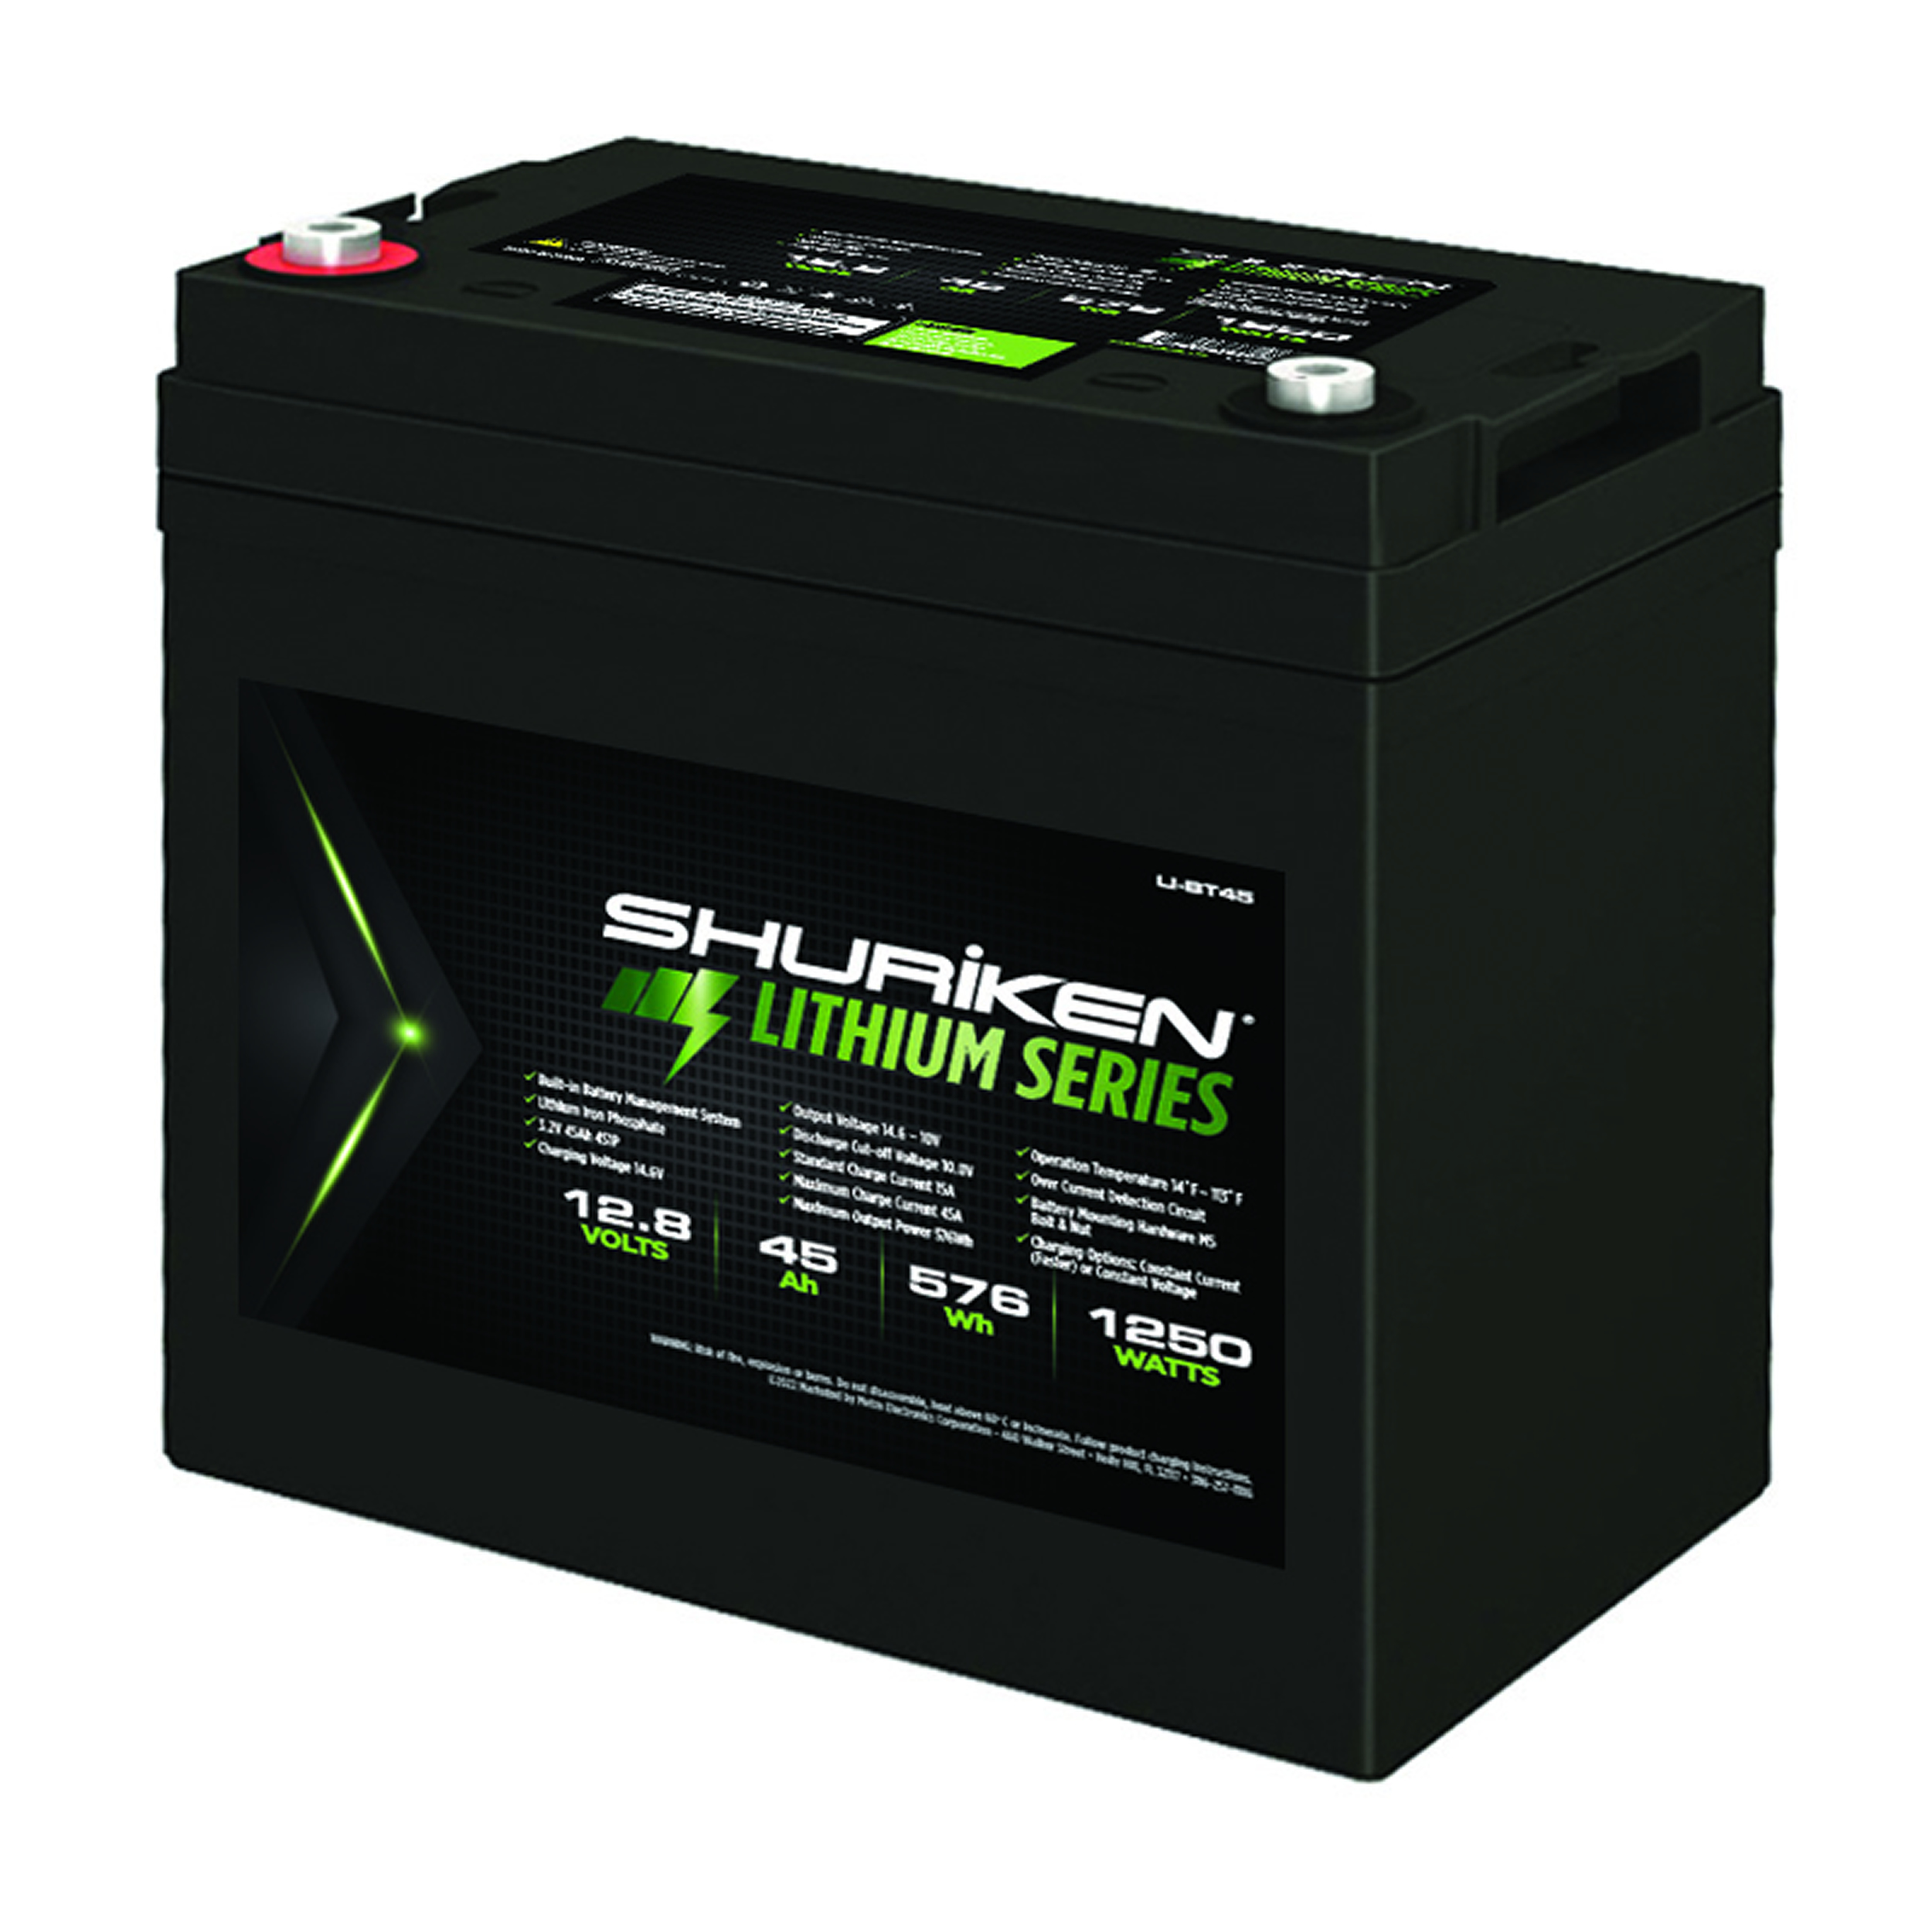 1250W / 45 Amp Hours Lithium Iron Battery